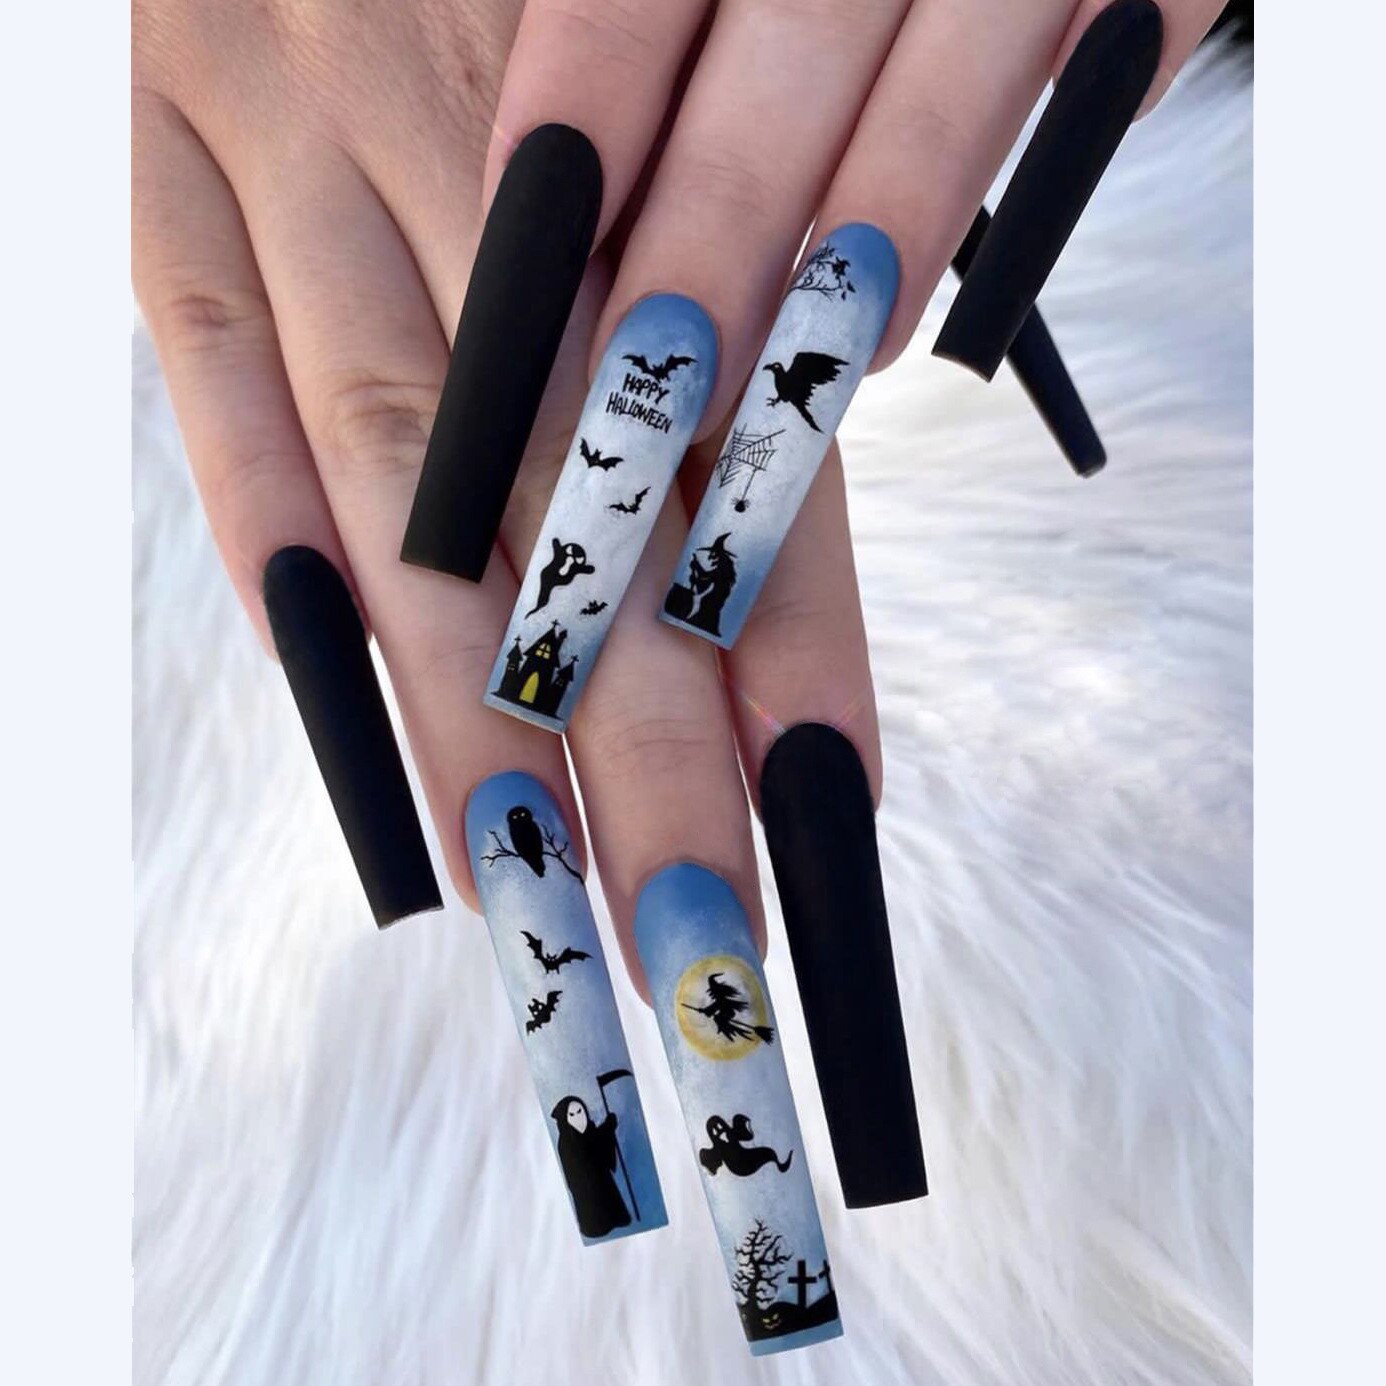 24Pcs Halloween False Nails Wearable French Long Fake Nails Coffin Ballet Press on Nail Black Pumpkin Patch Design Manicure Tips